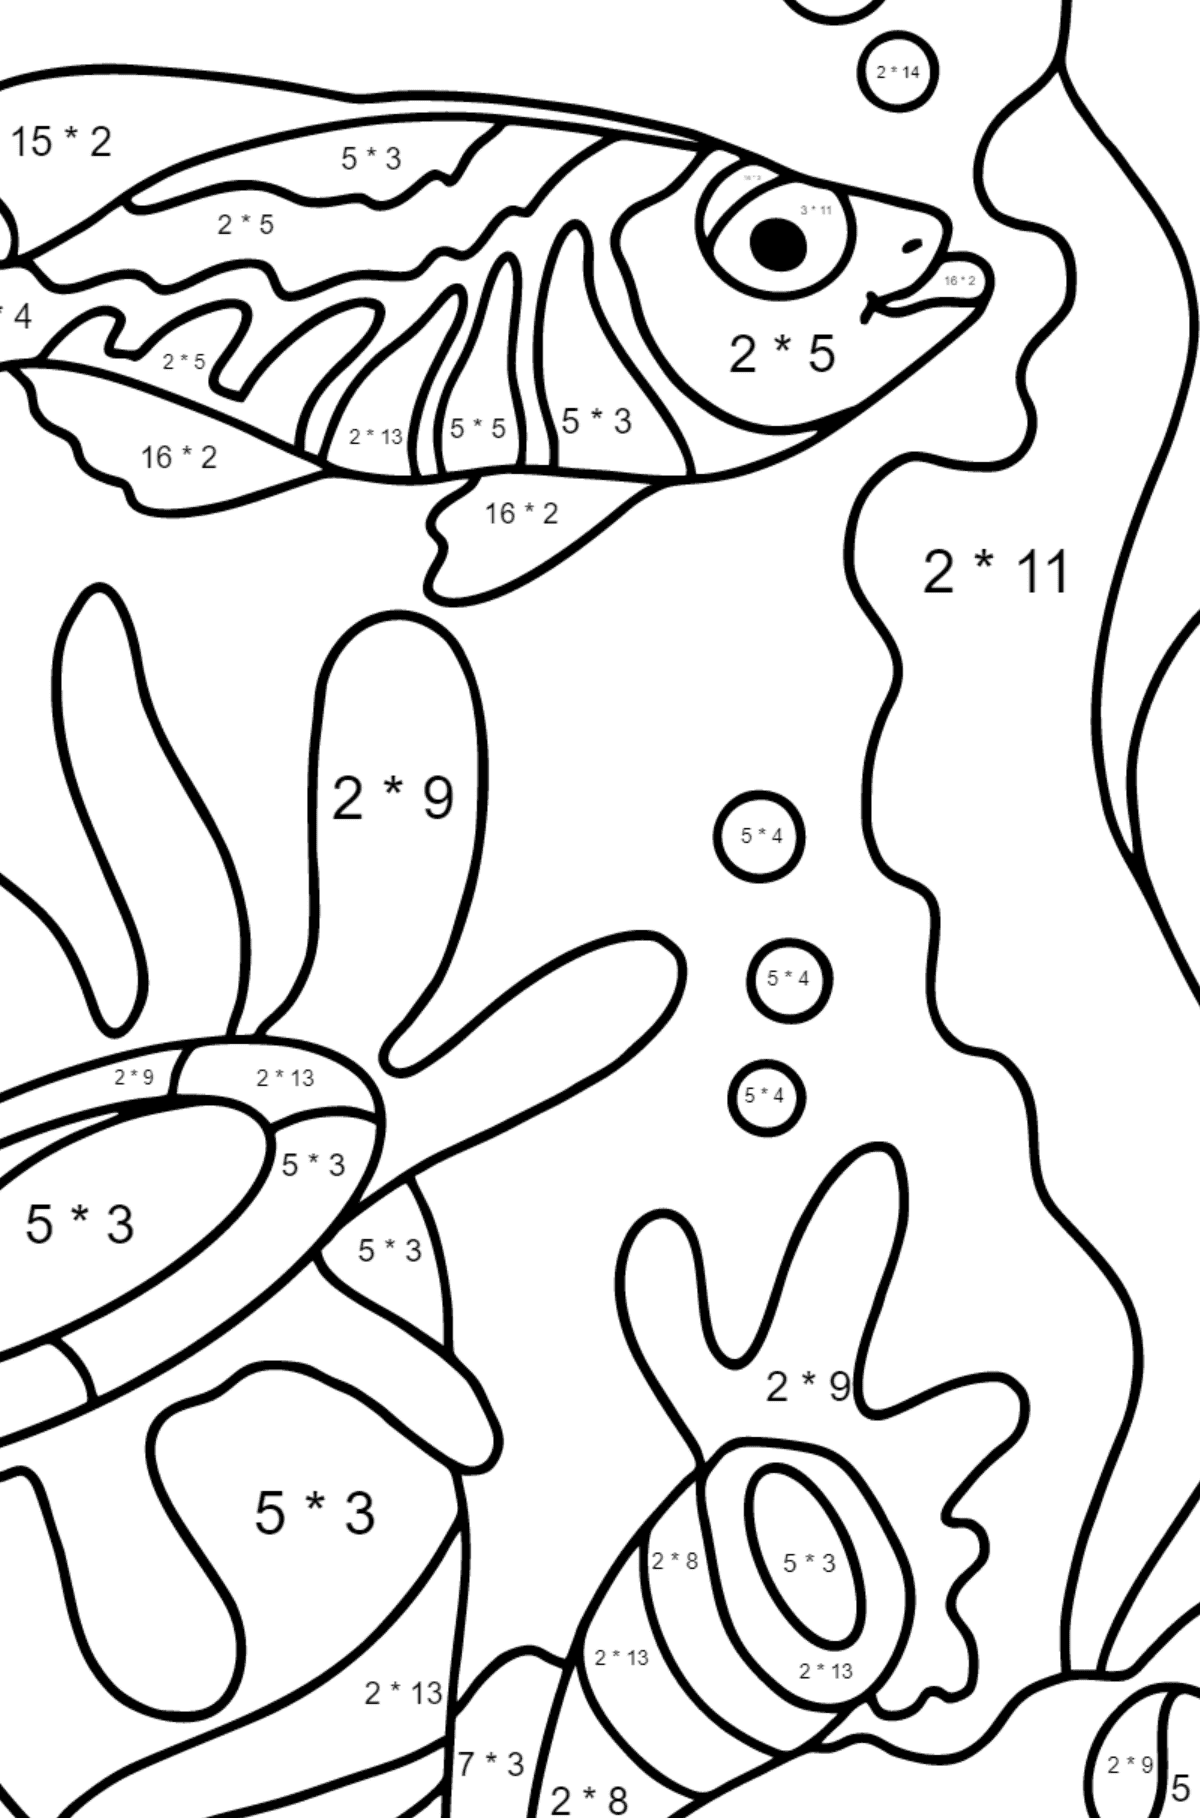 Coloring Page - A Fish is Swimming - Math Coloring - Multiplication for Kids